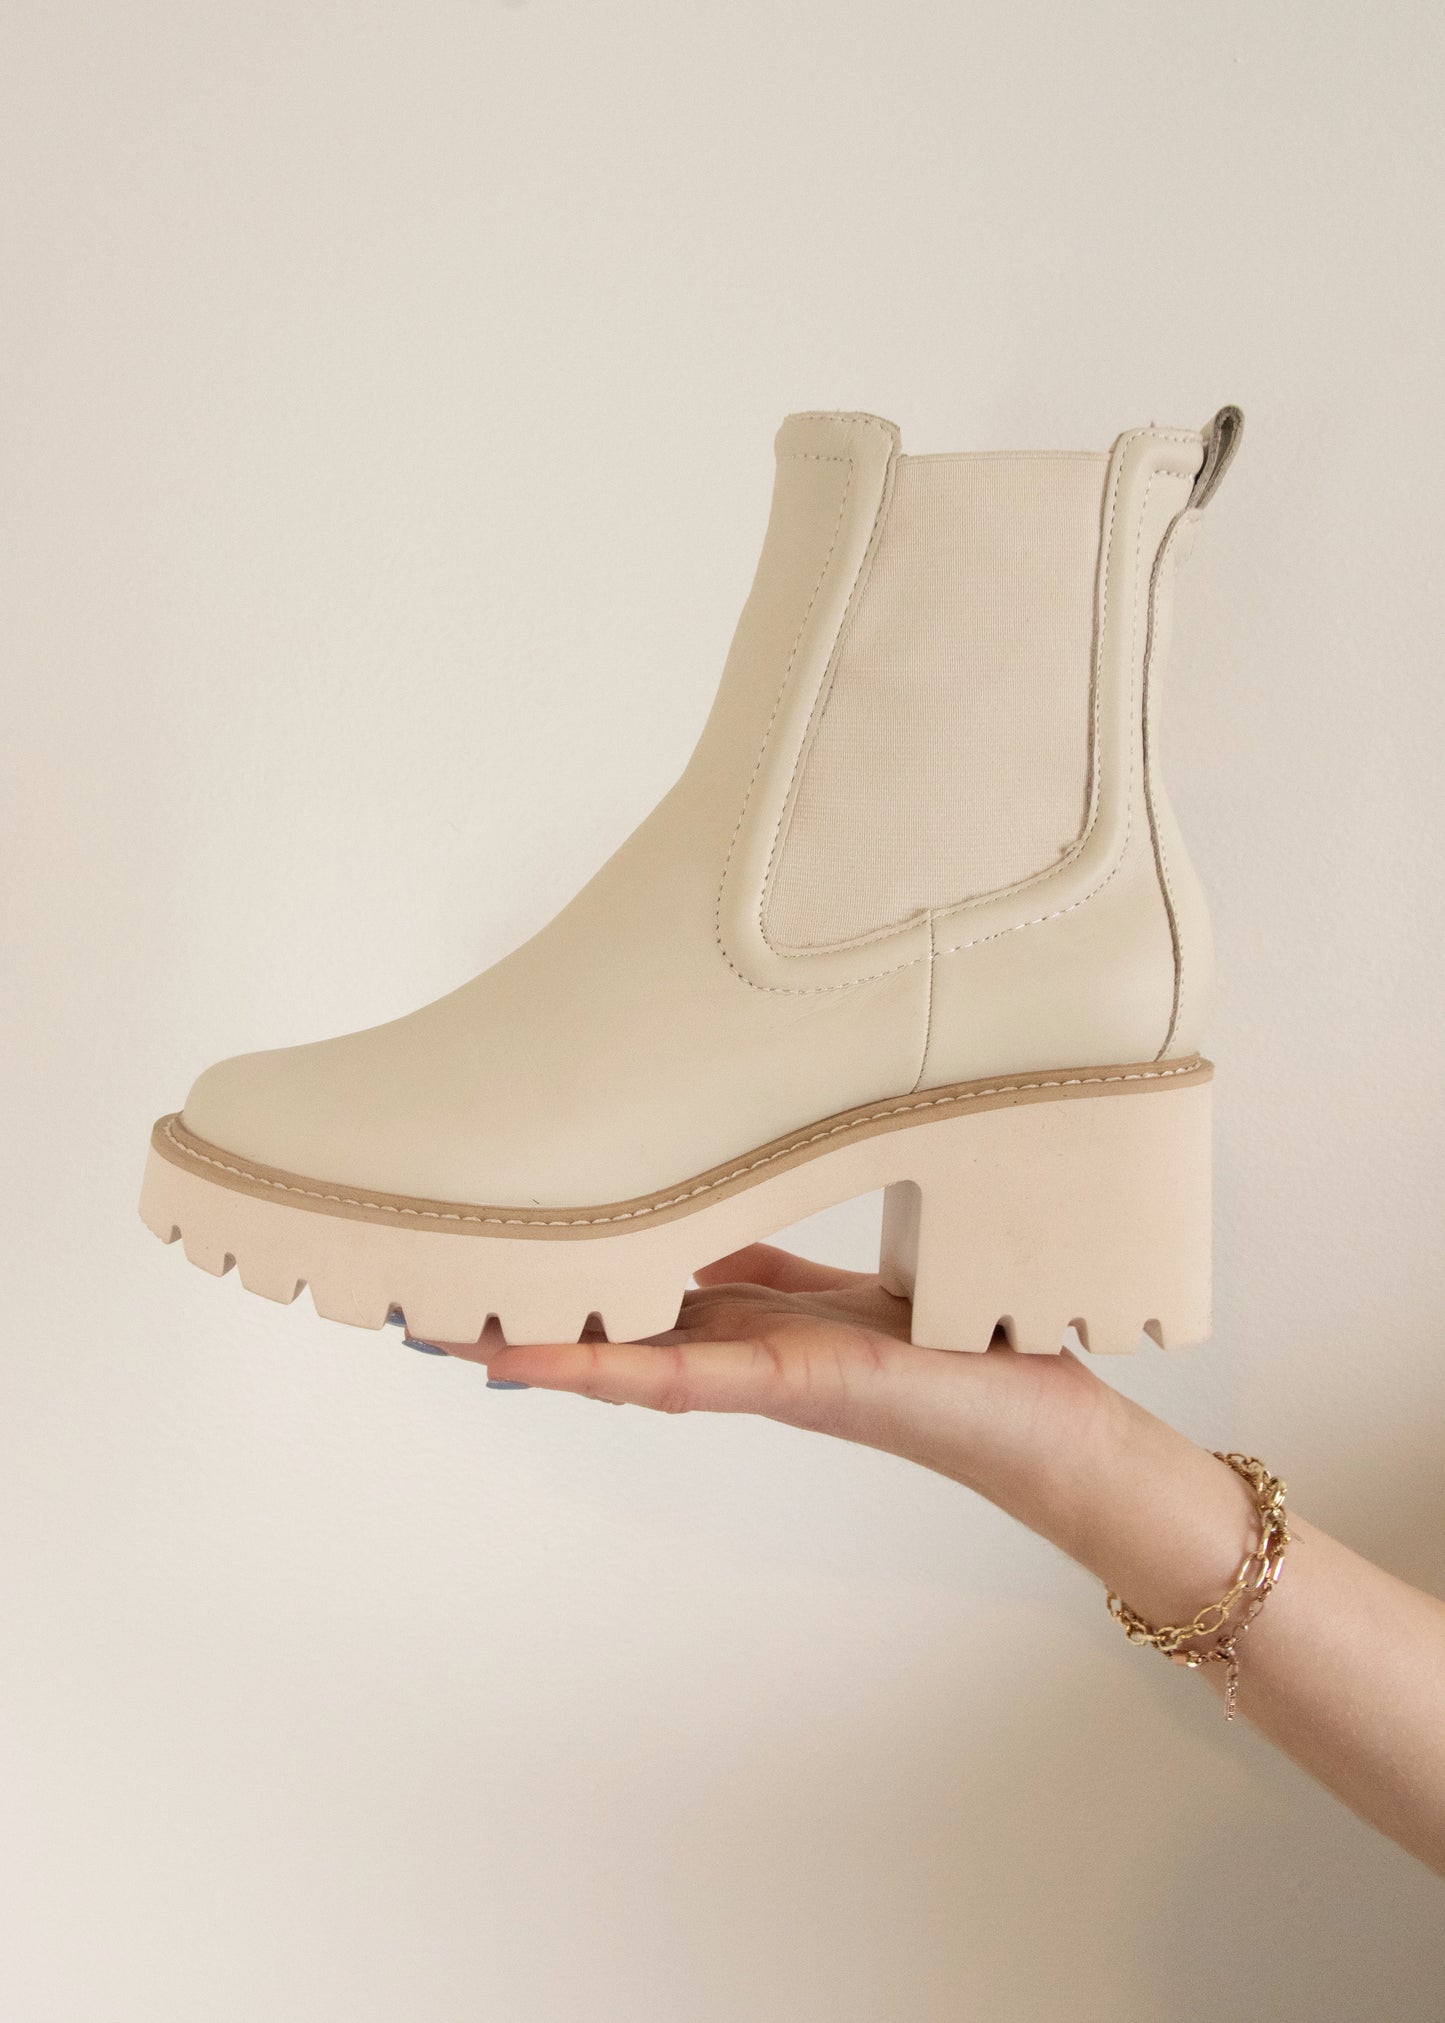 Dolce Vita HAWK Boots - IVORY LEATHER